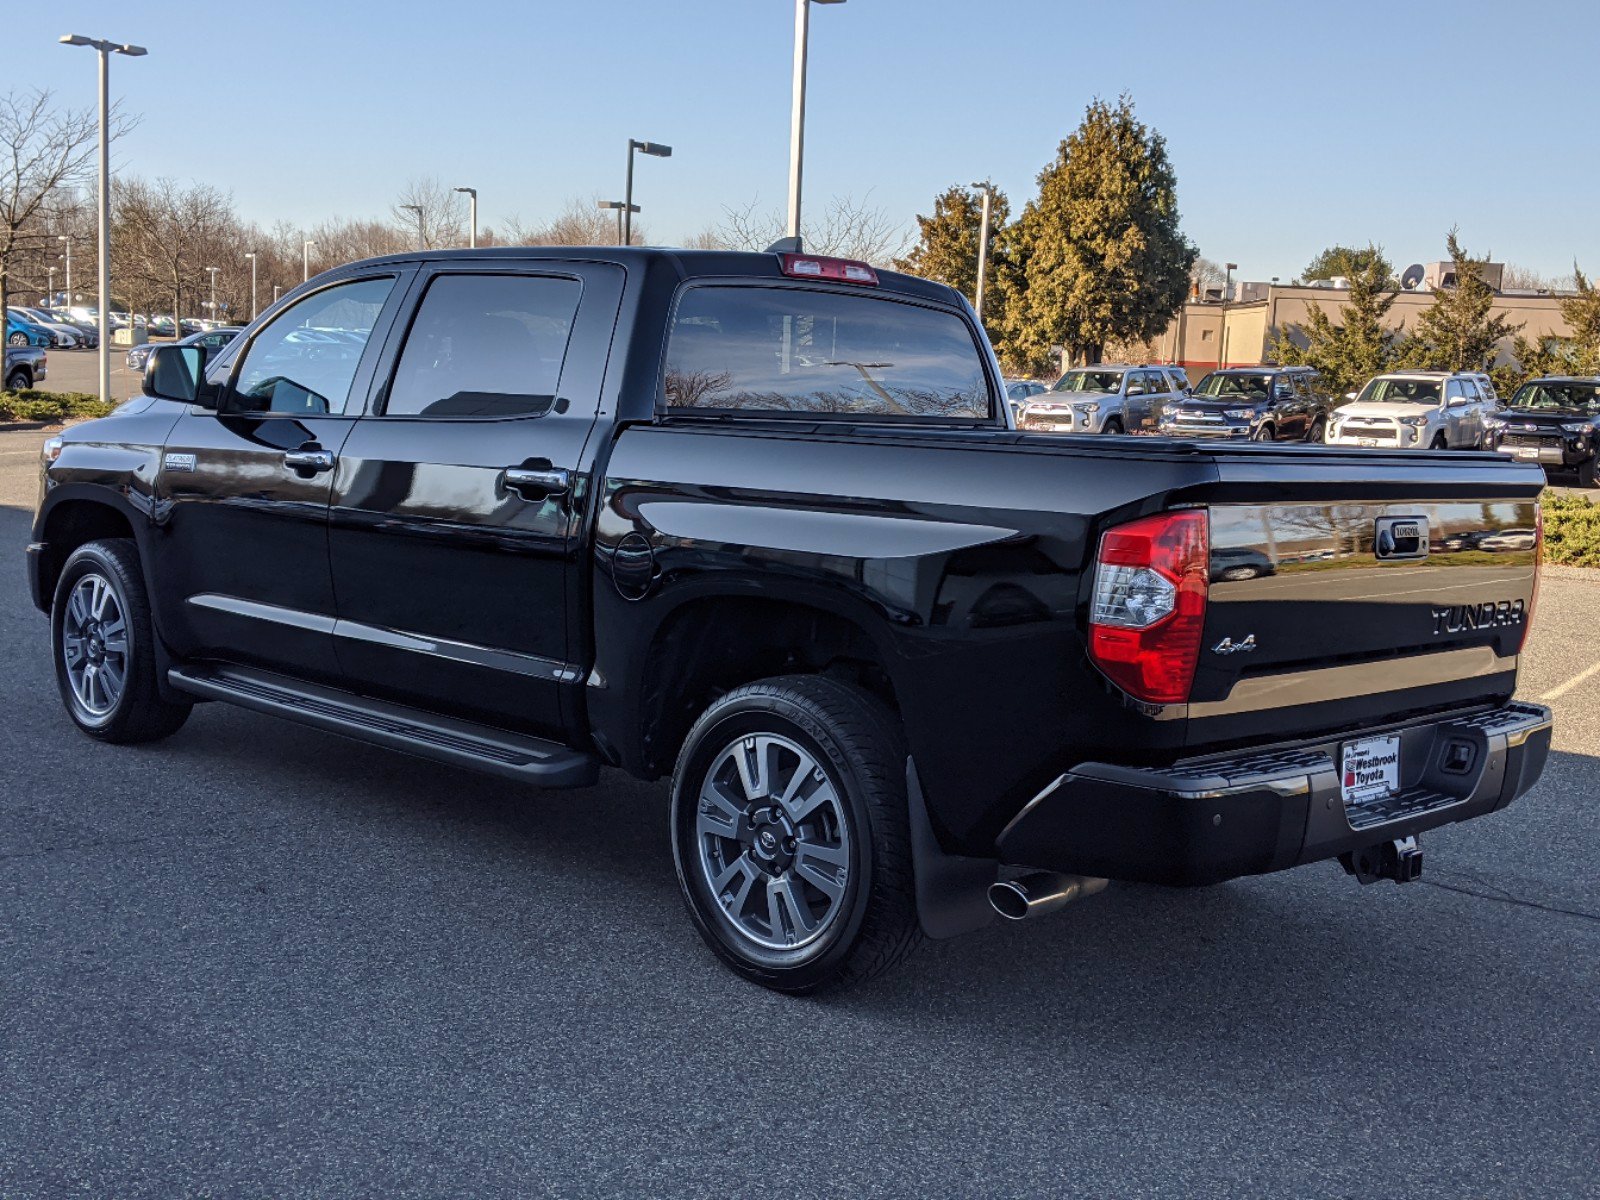 New 2020 Toyota Tundra 1794 Edition CrewMax in Westbrook #20085